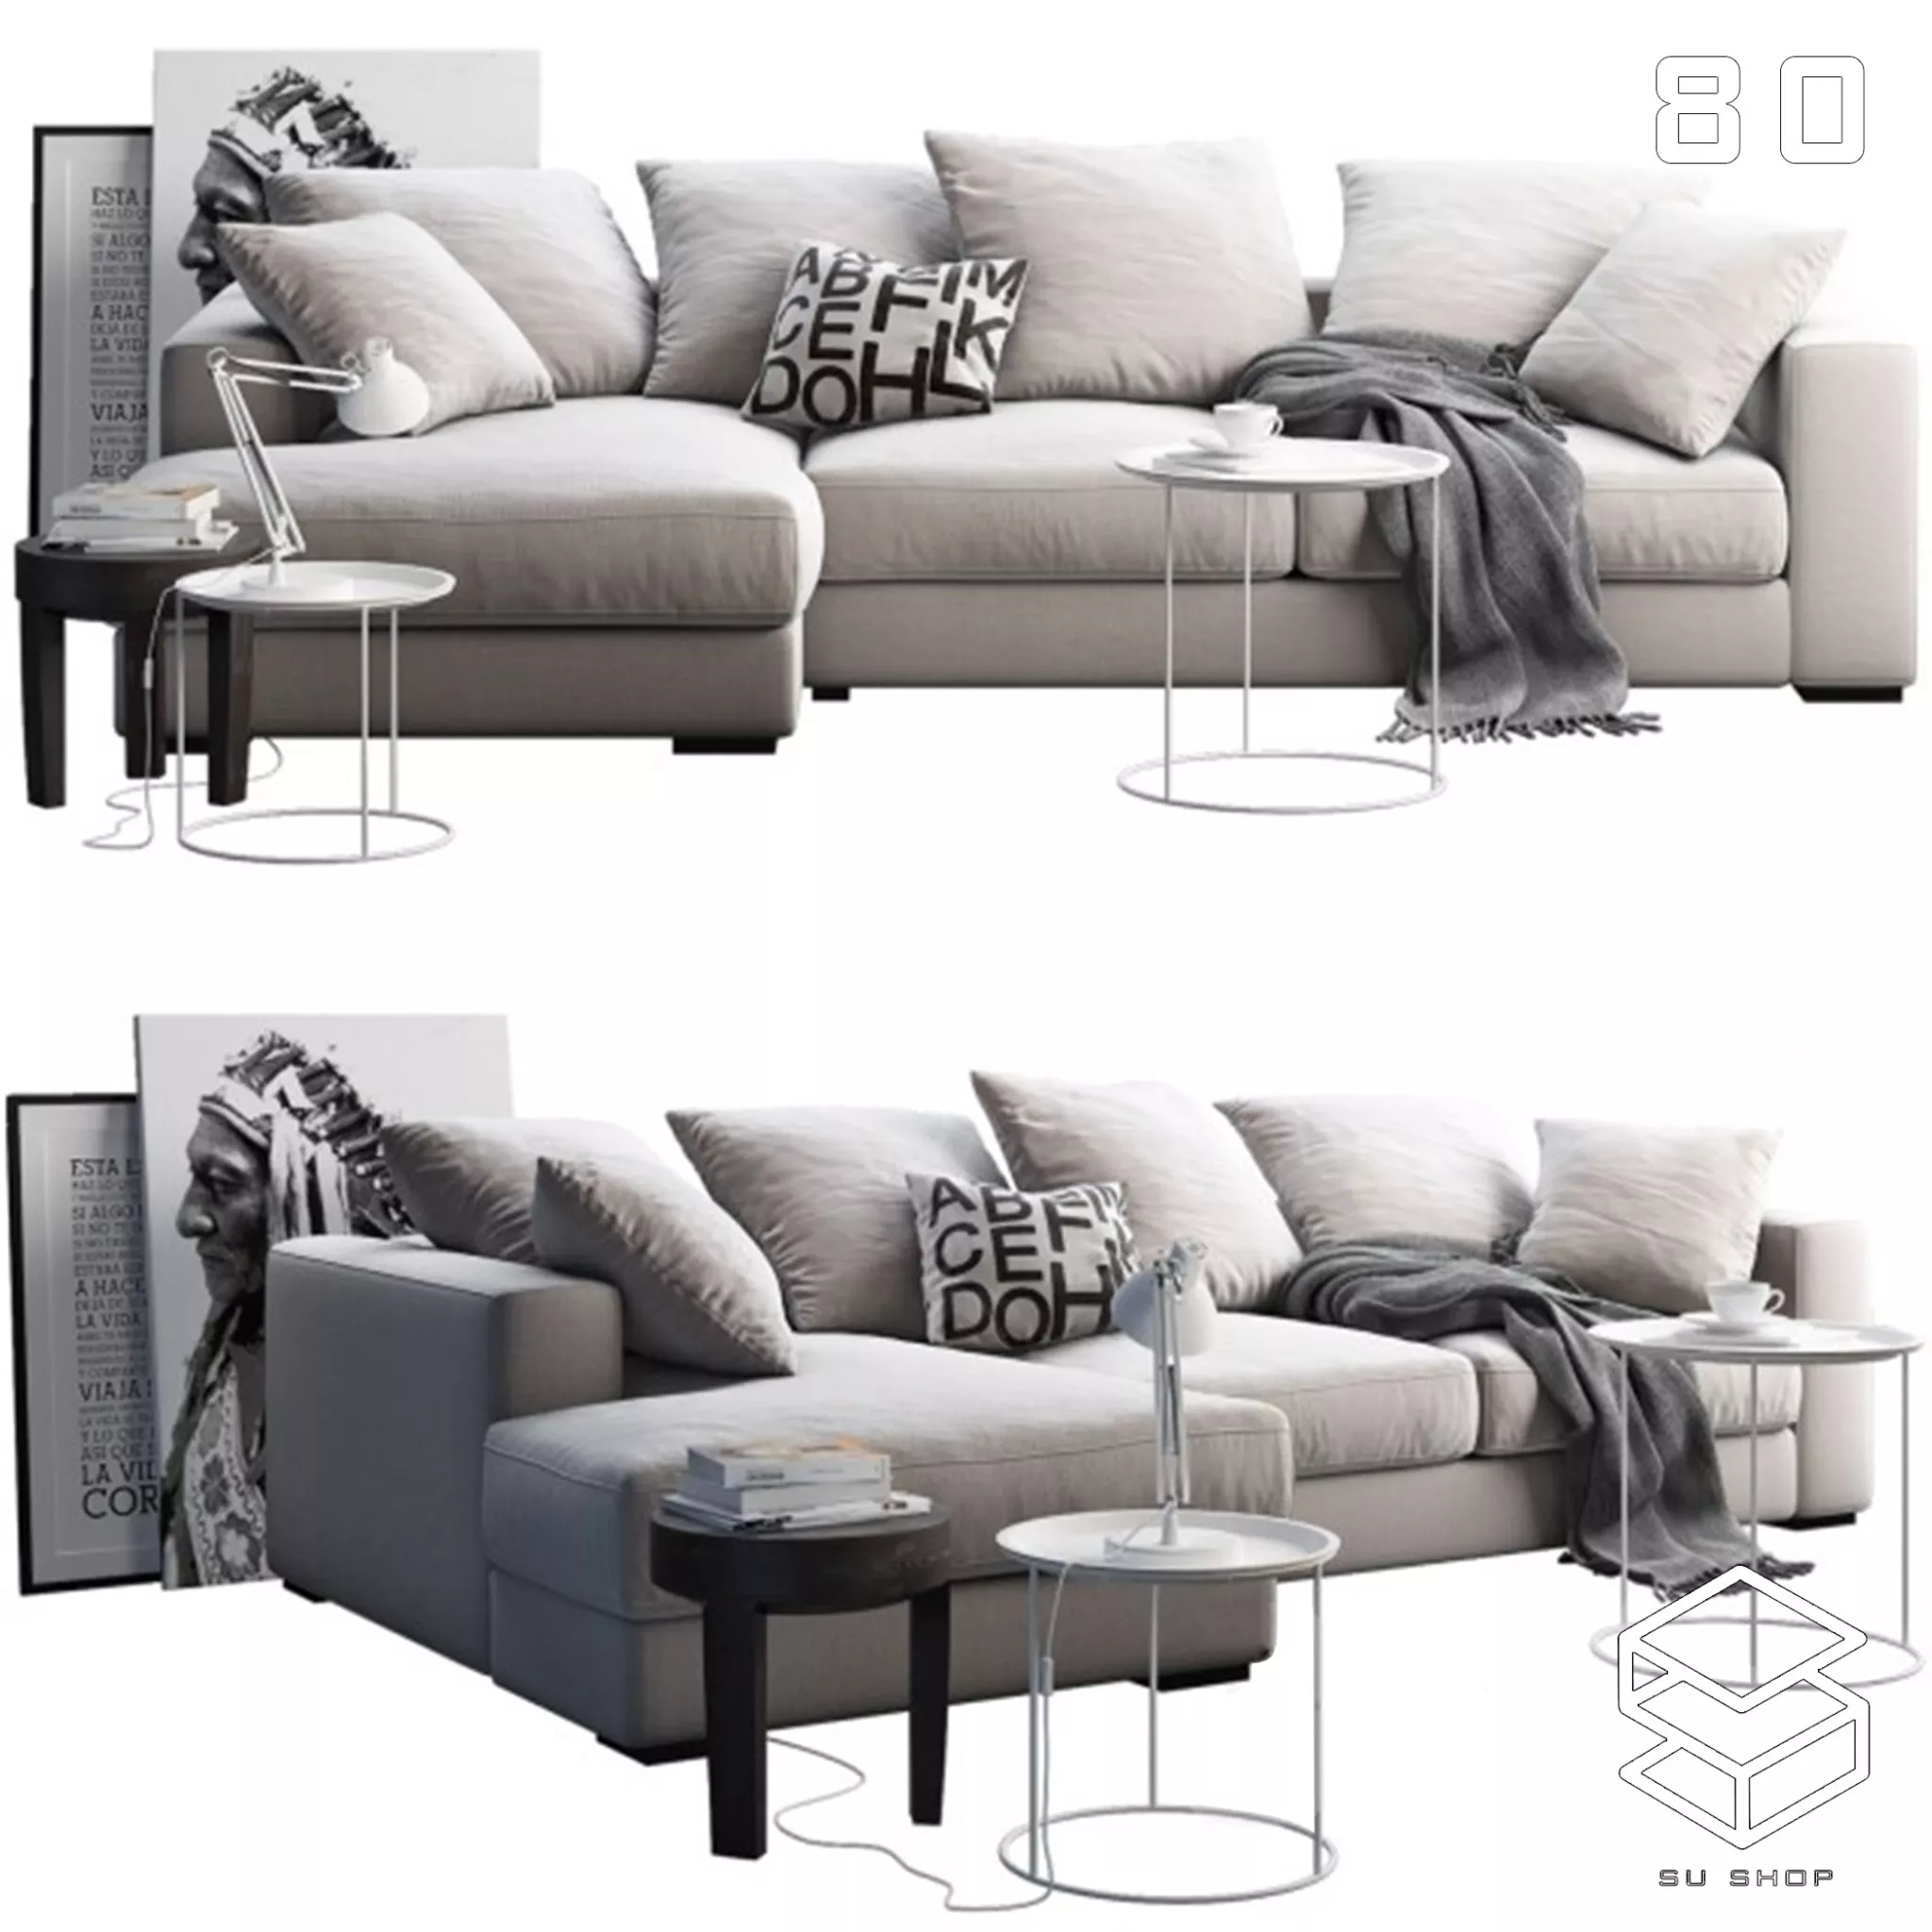 MODERN SOFA - SKETCHUP 3D MODEL - VRAY OR ENSCAPE - ID13708